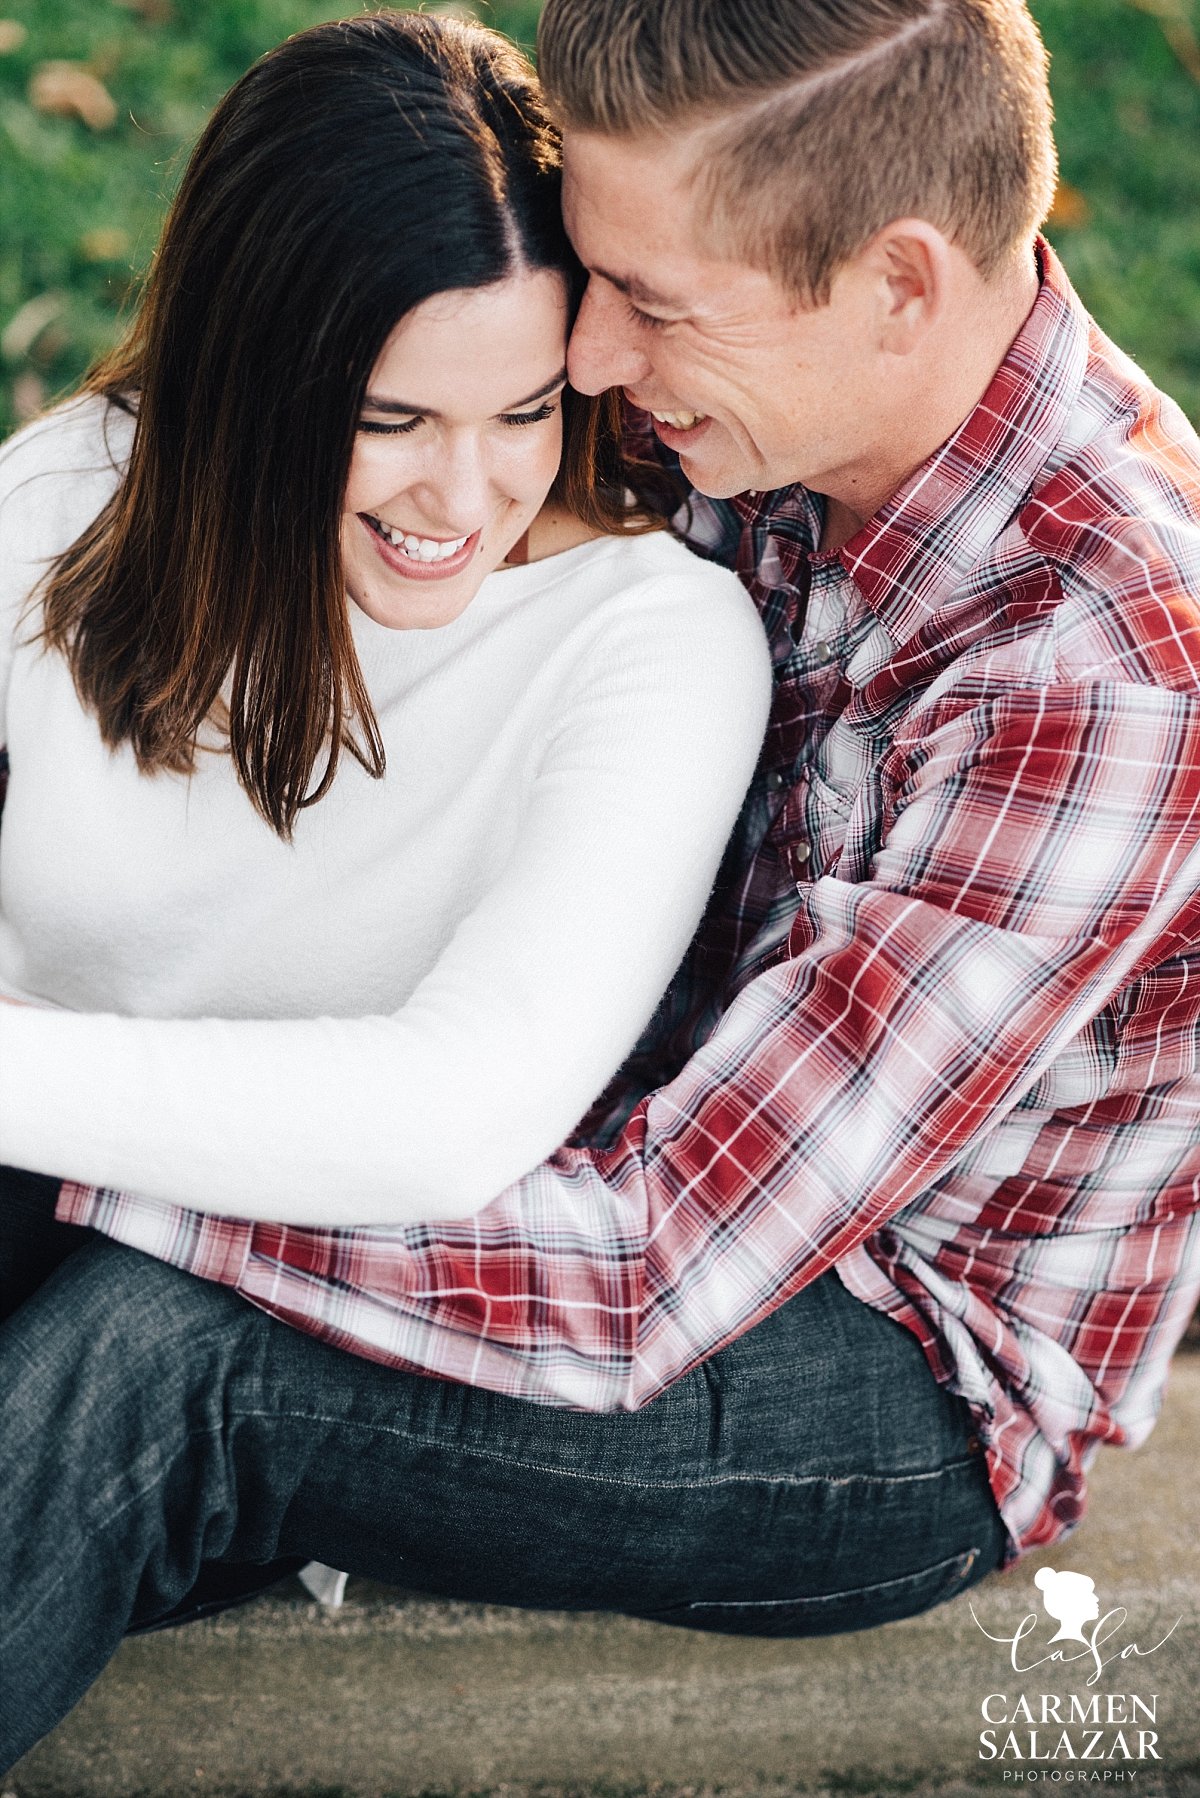 Romantic and casual engagement photography - Carmen Salazar